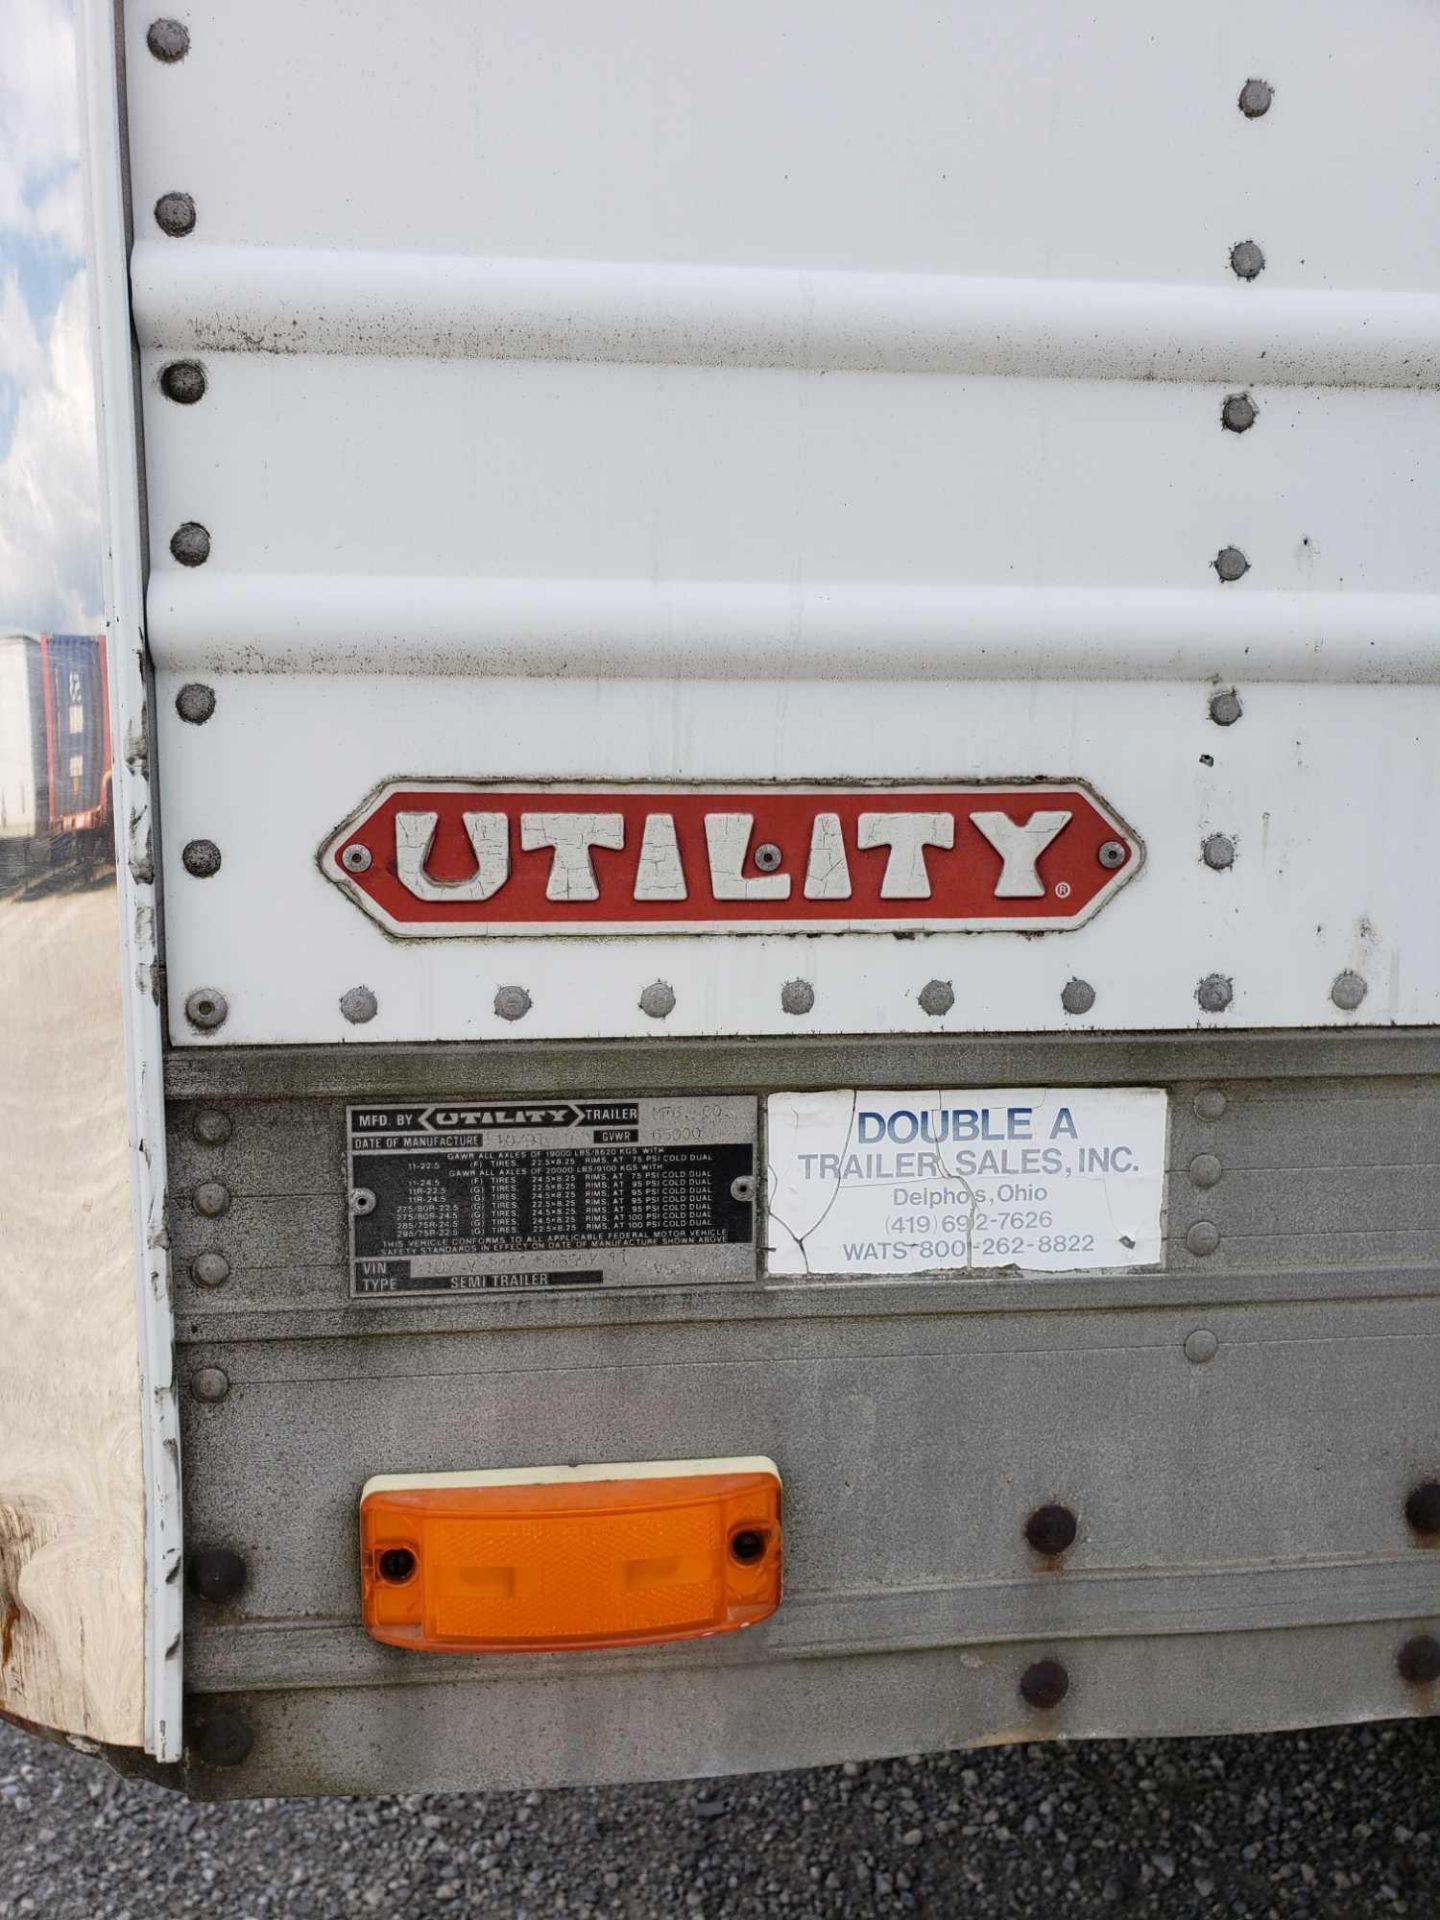 1991 Utility Trailer Company 53" trailer. VIN 1UYVS2480NM655711. Trailer is titled. No reefer unit. - Image 3 of 15